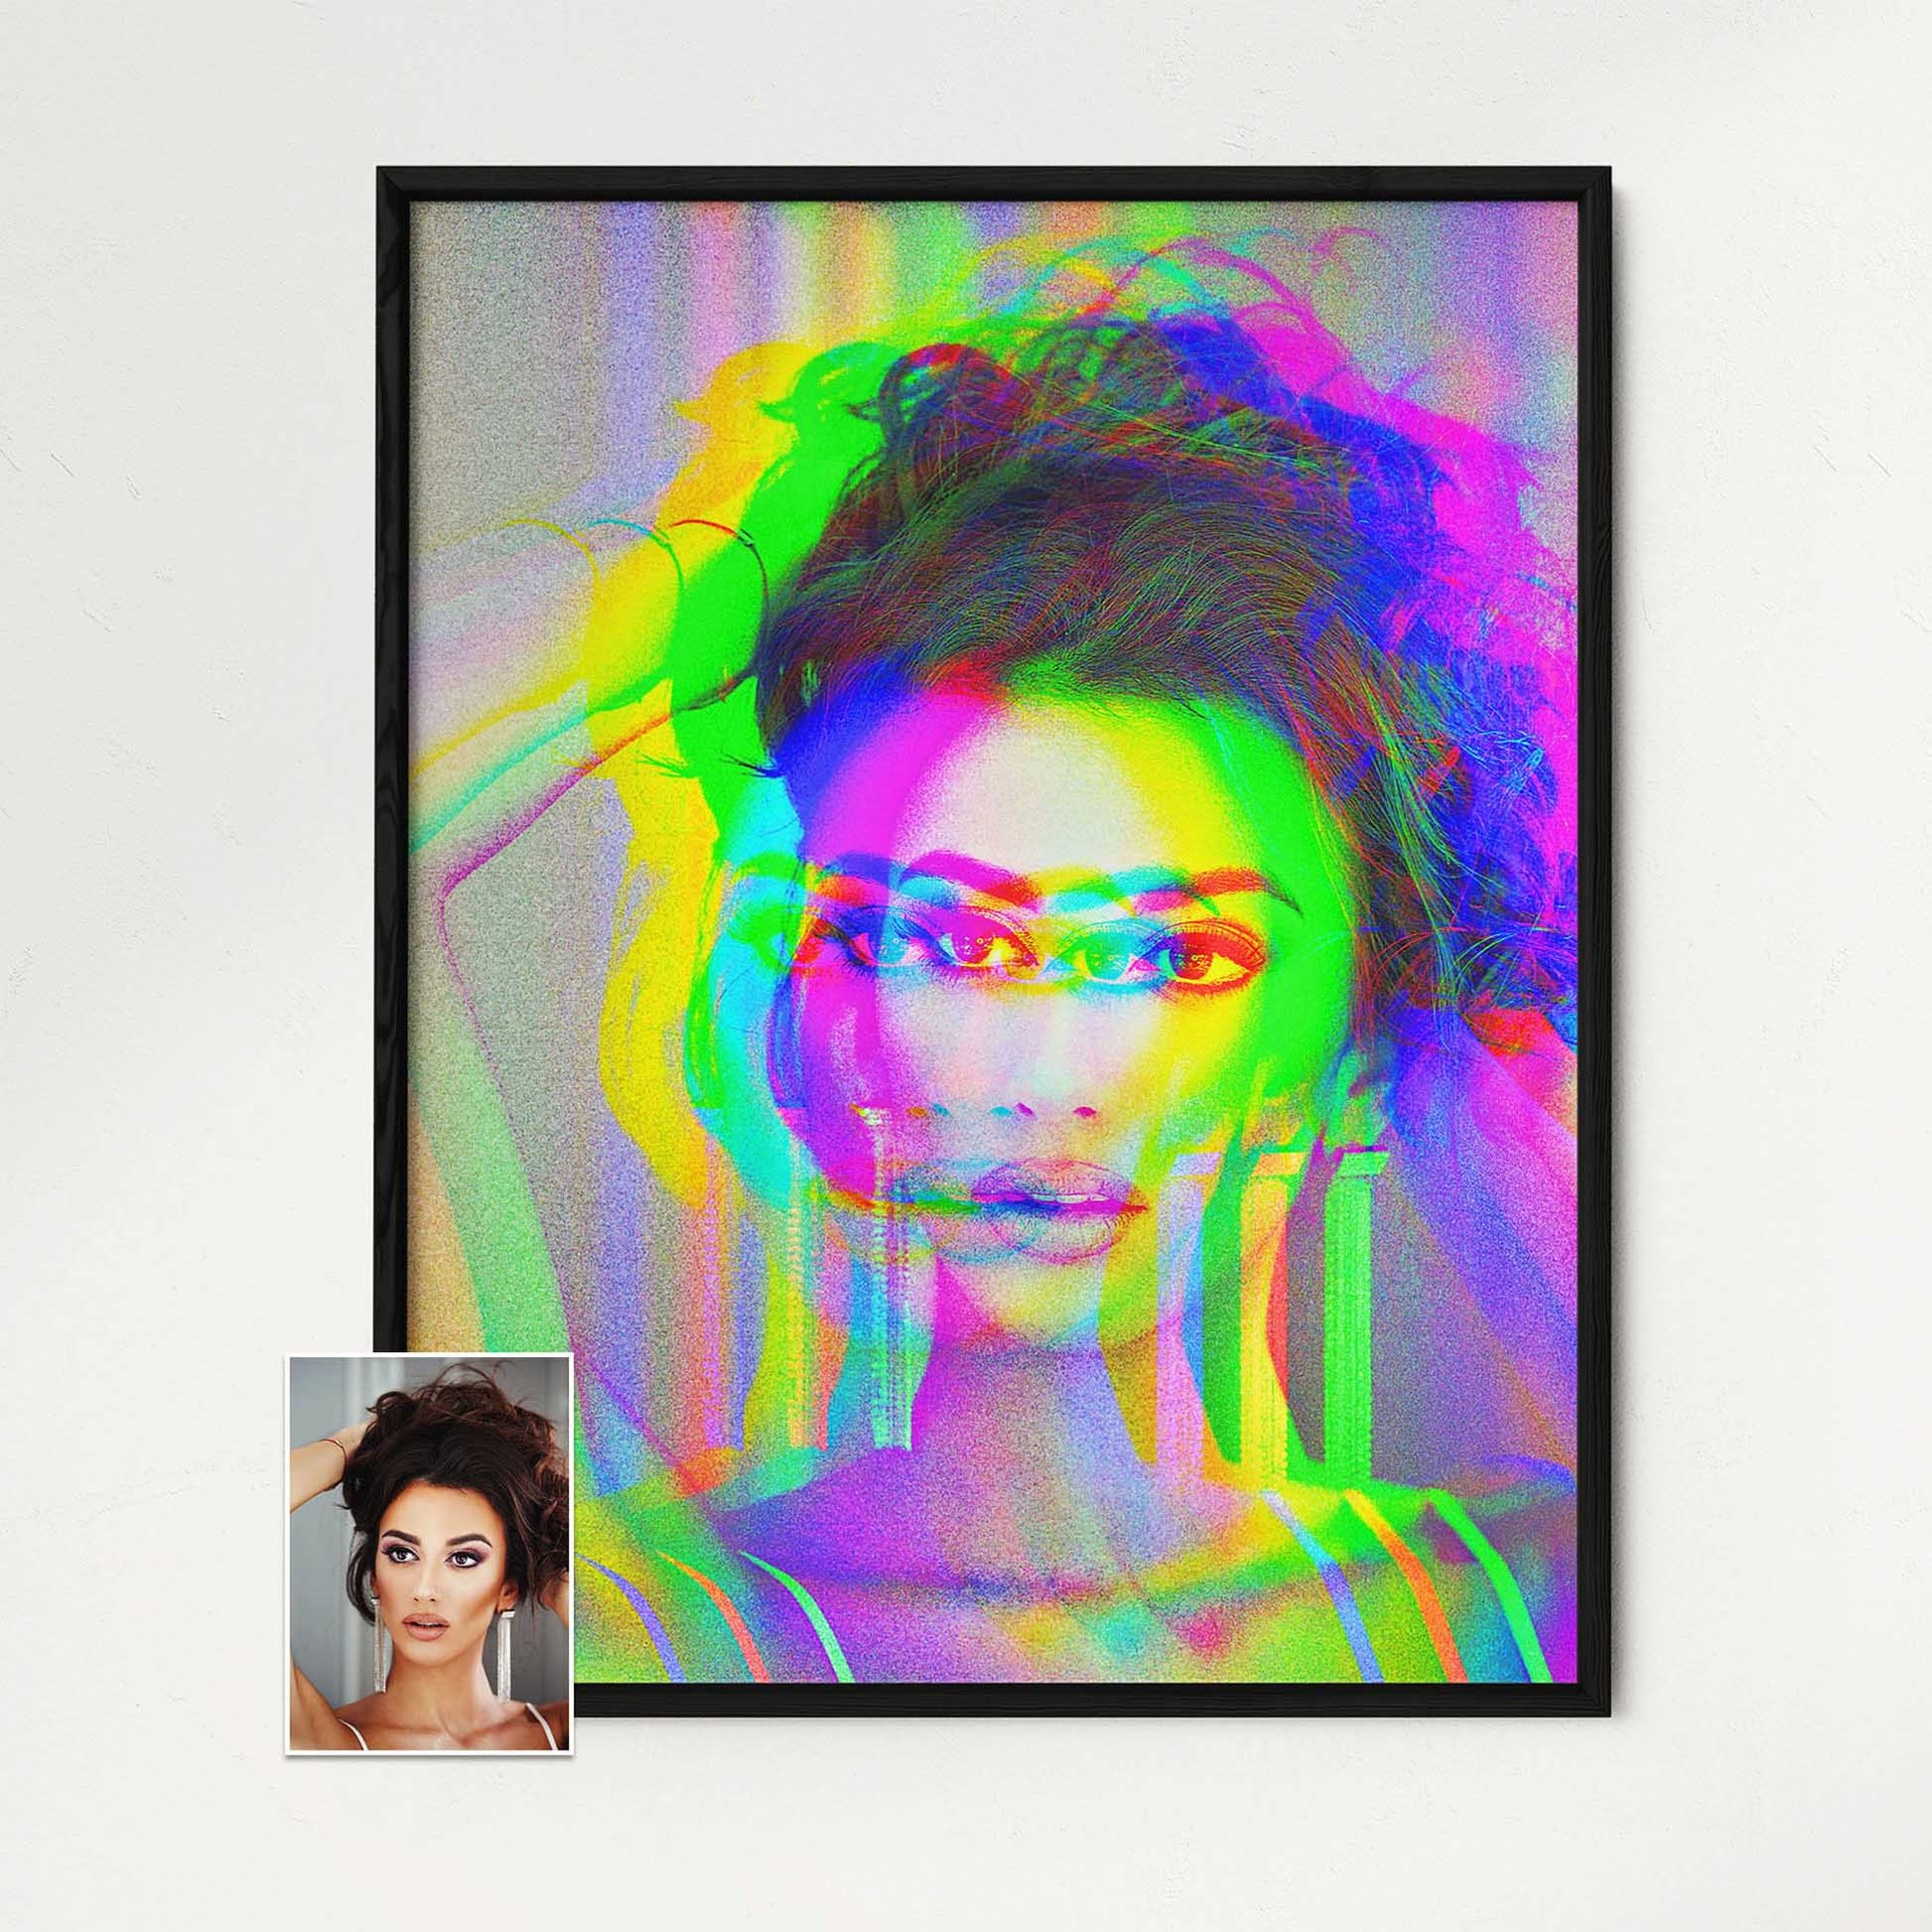 Unique and Original Digital Artwork: Crafted from your favorite photo, this anaglyph print showcases a unique and original piece of digital artwork. The vibrant and bright colors pop off the thick paper